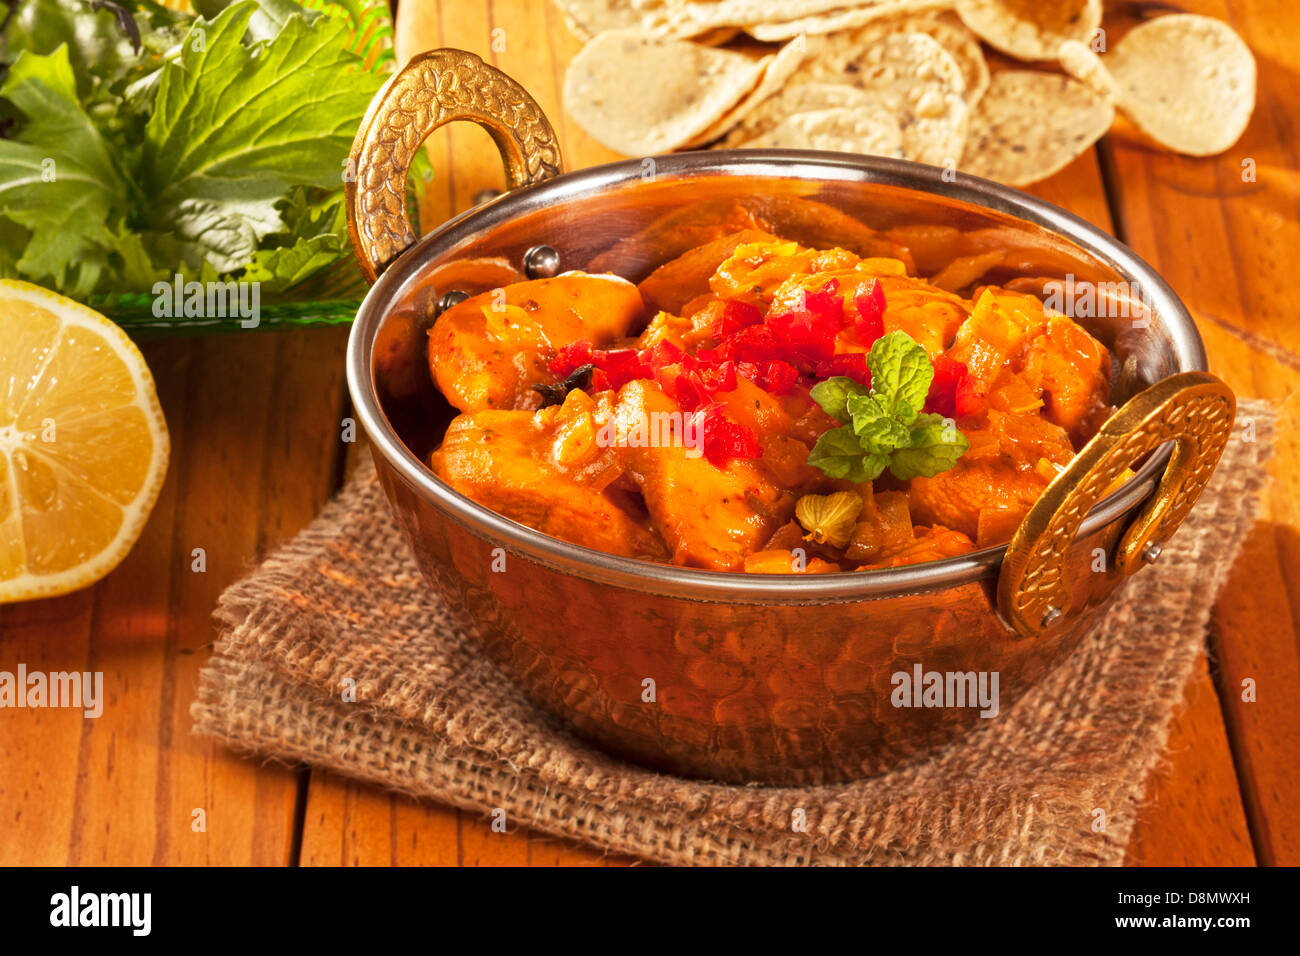 Chicken curry in a balti dish, with mini poppadums, salad and lemon. Stock Photo